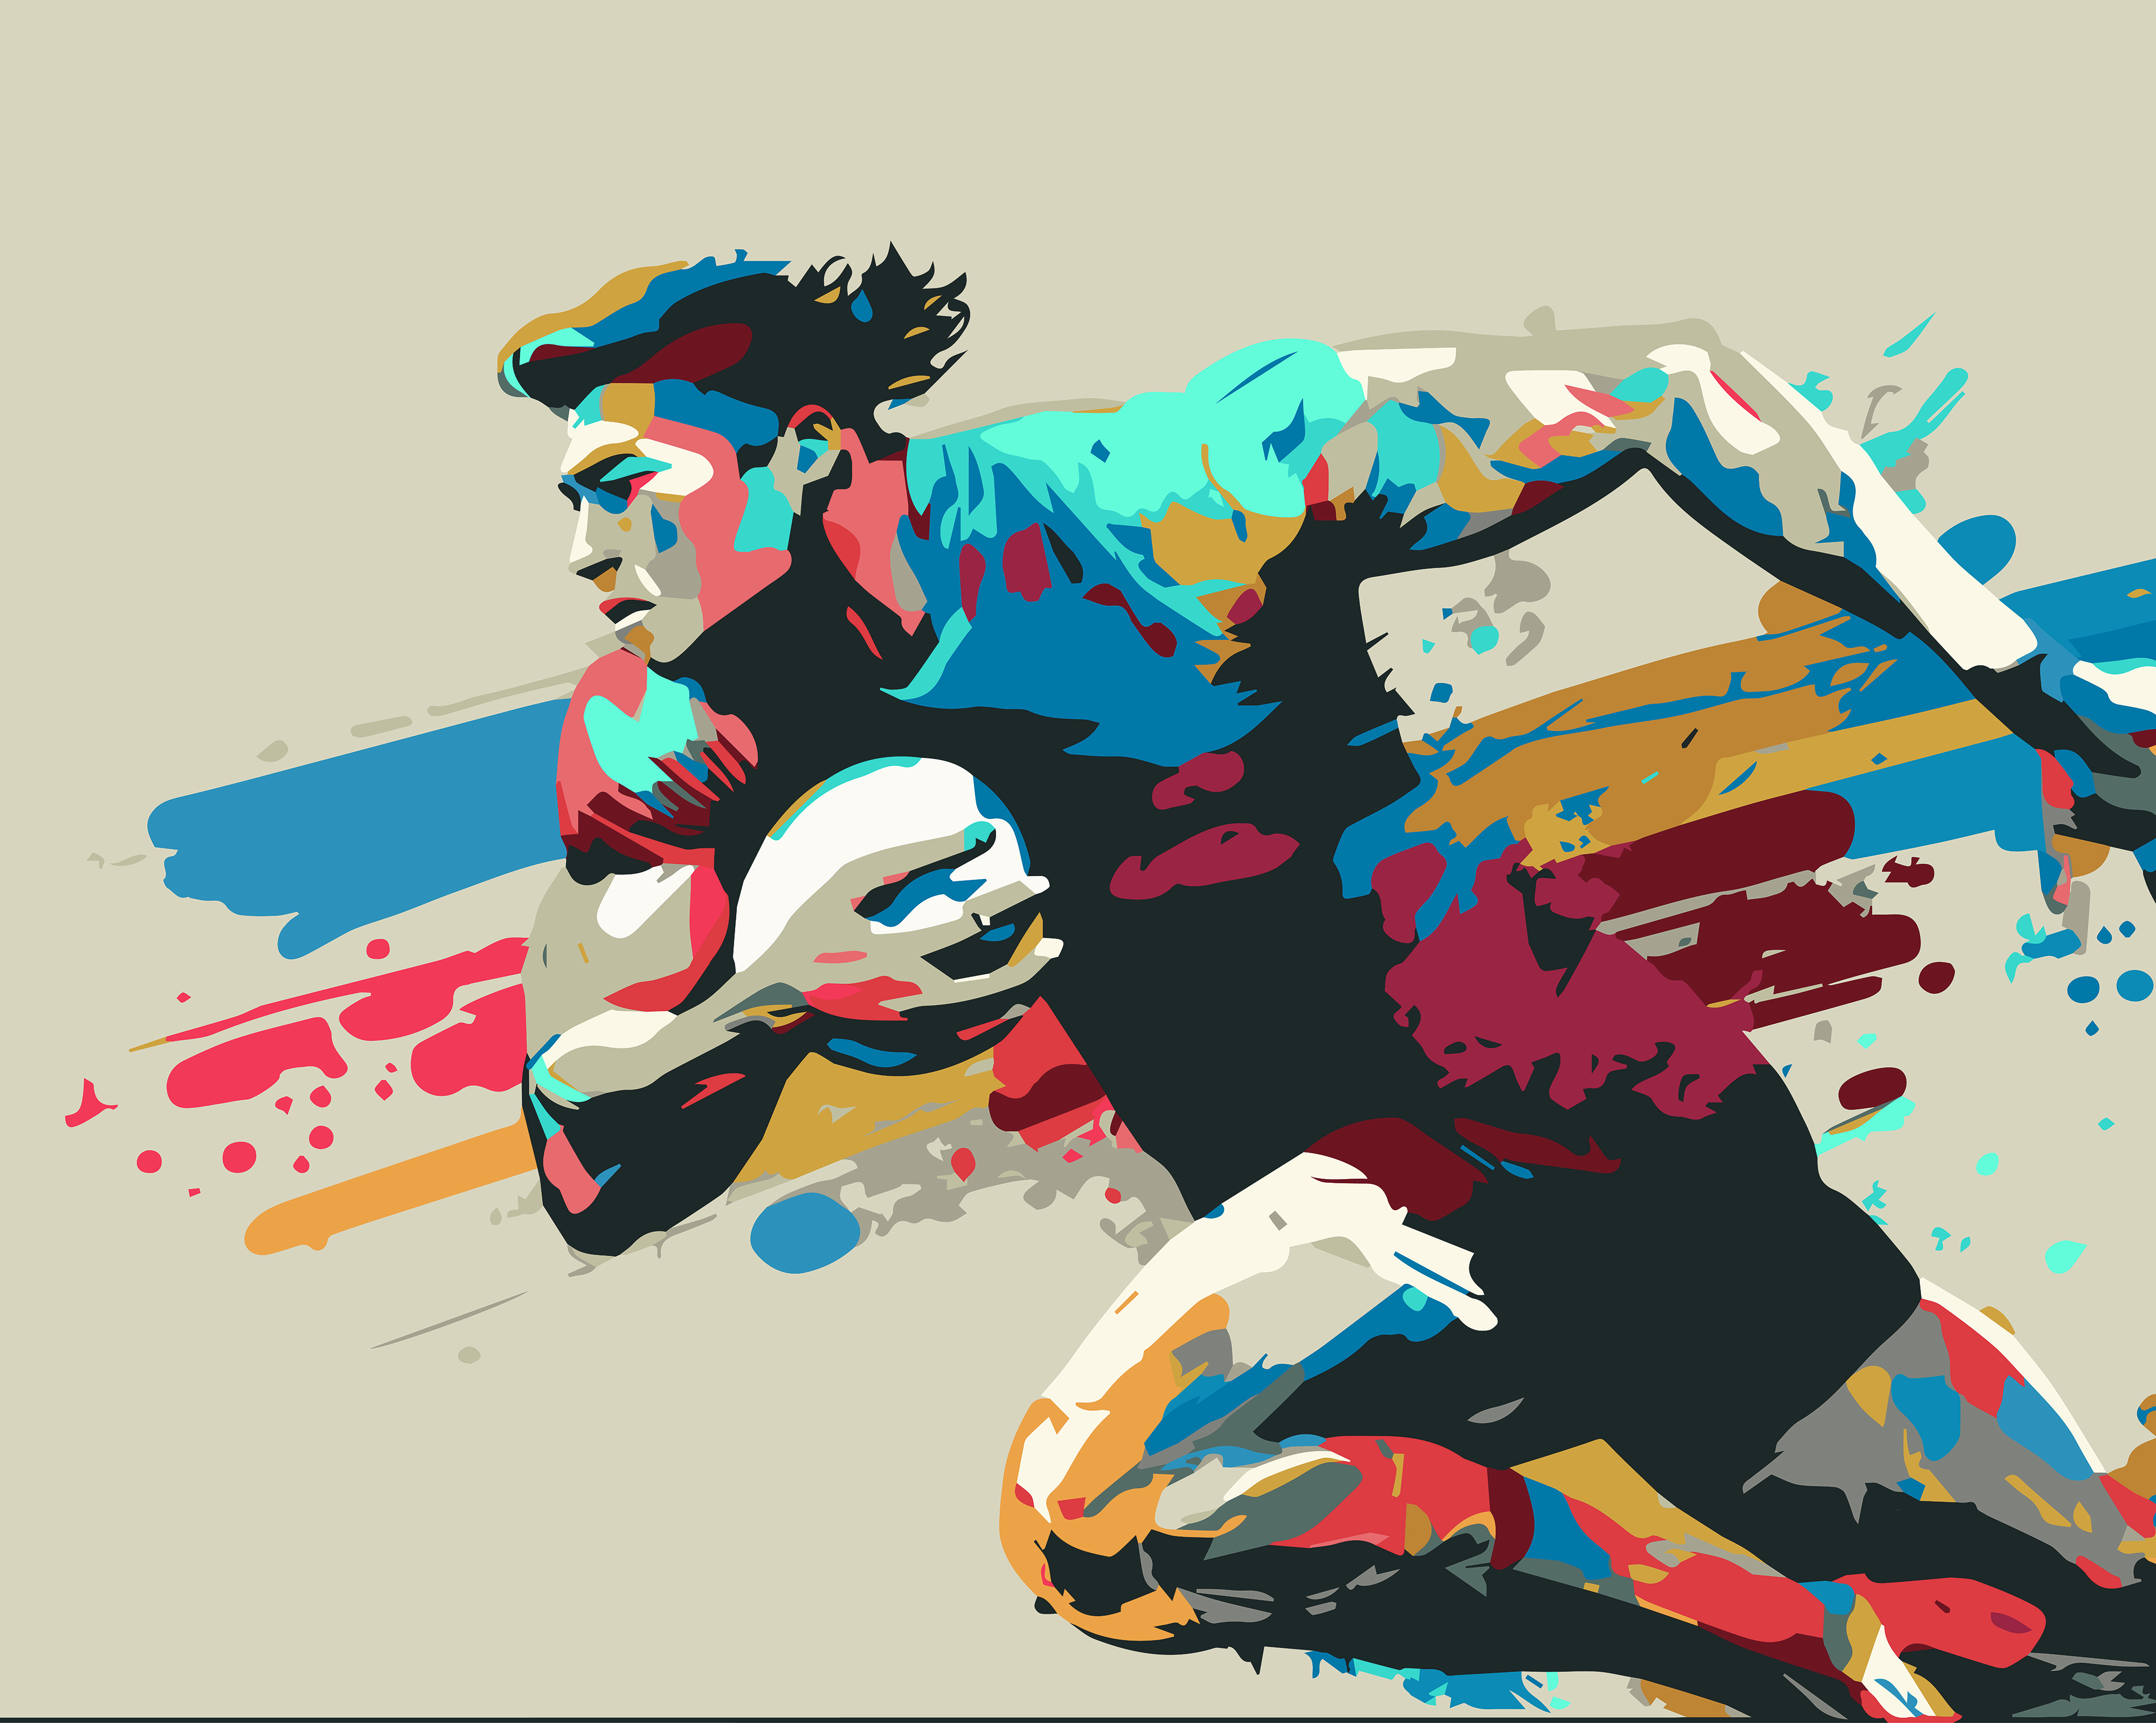 Origin Murals Rugby Player in Graphic Style Natural Wall Mural - 3 x 2.4m